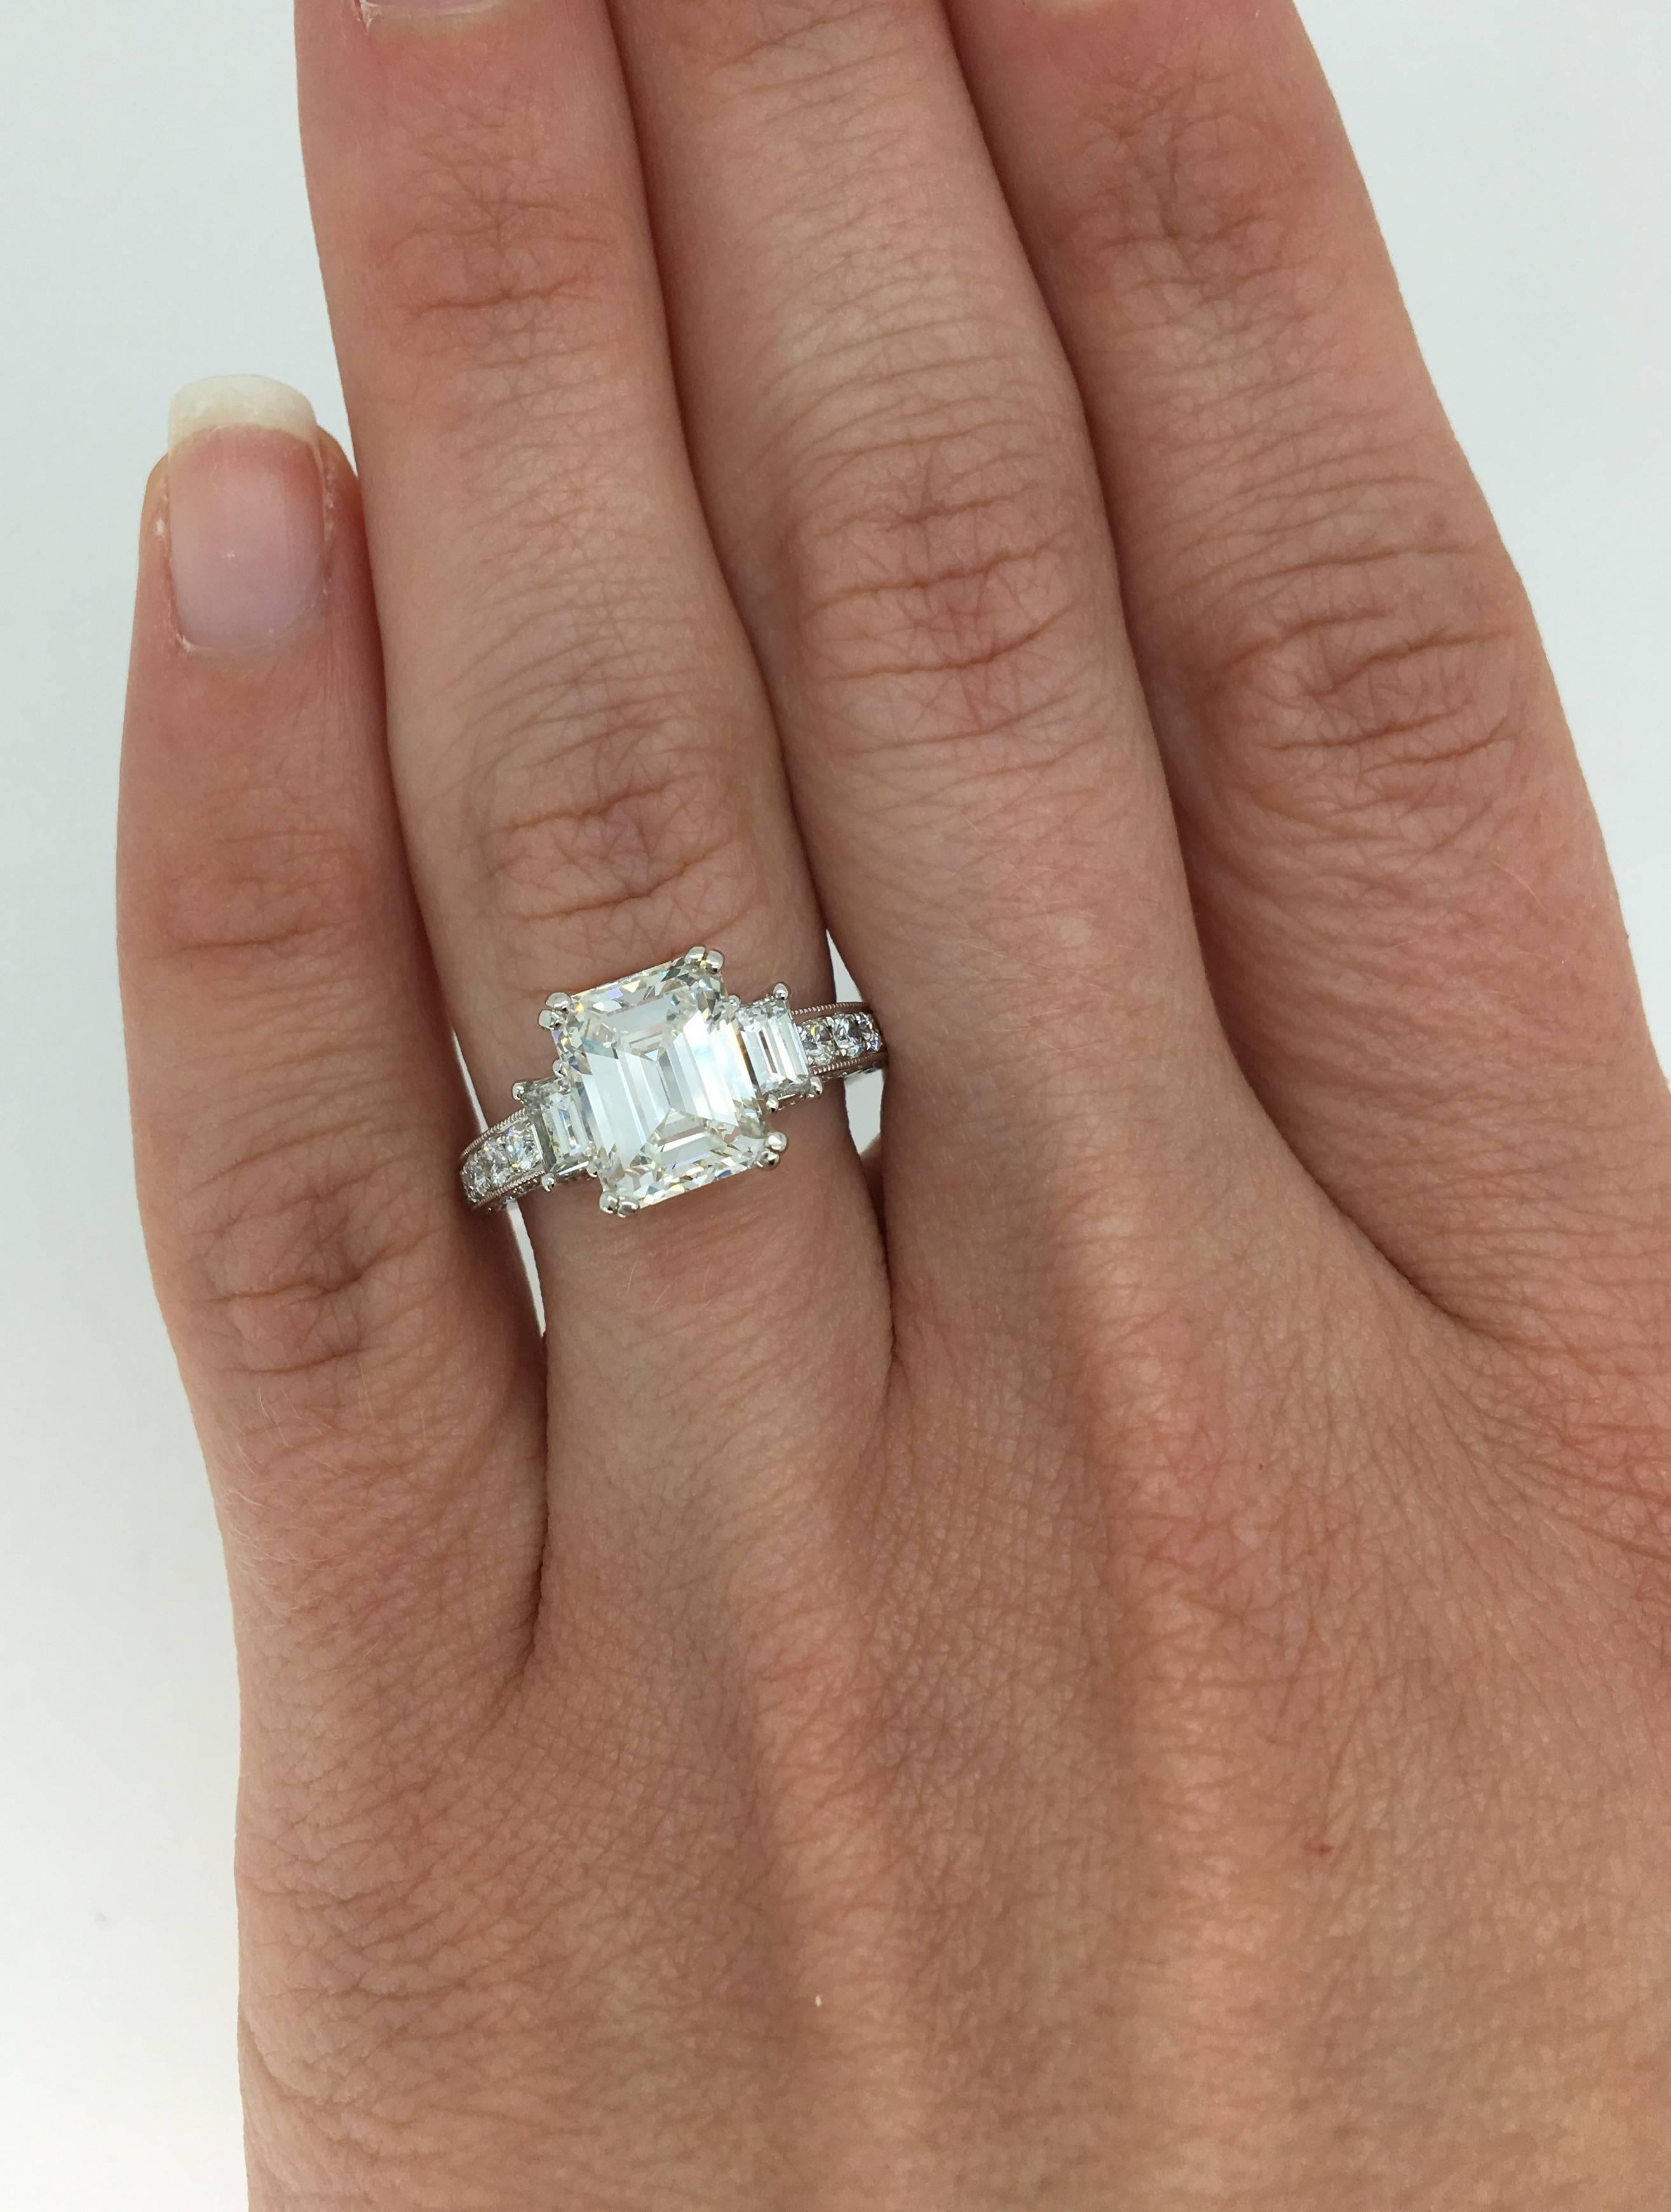 Stunning diamond engagement ring features a large 2.65CT EGL Certified Emerald Cut Diamond in the center with H color, VS1 per EGL. Graded to GIA standards the diamond displays I-J color and VS1-VS2 clarity. There are two additional Emerald Cut